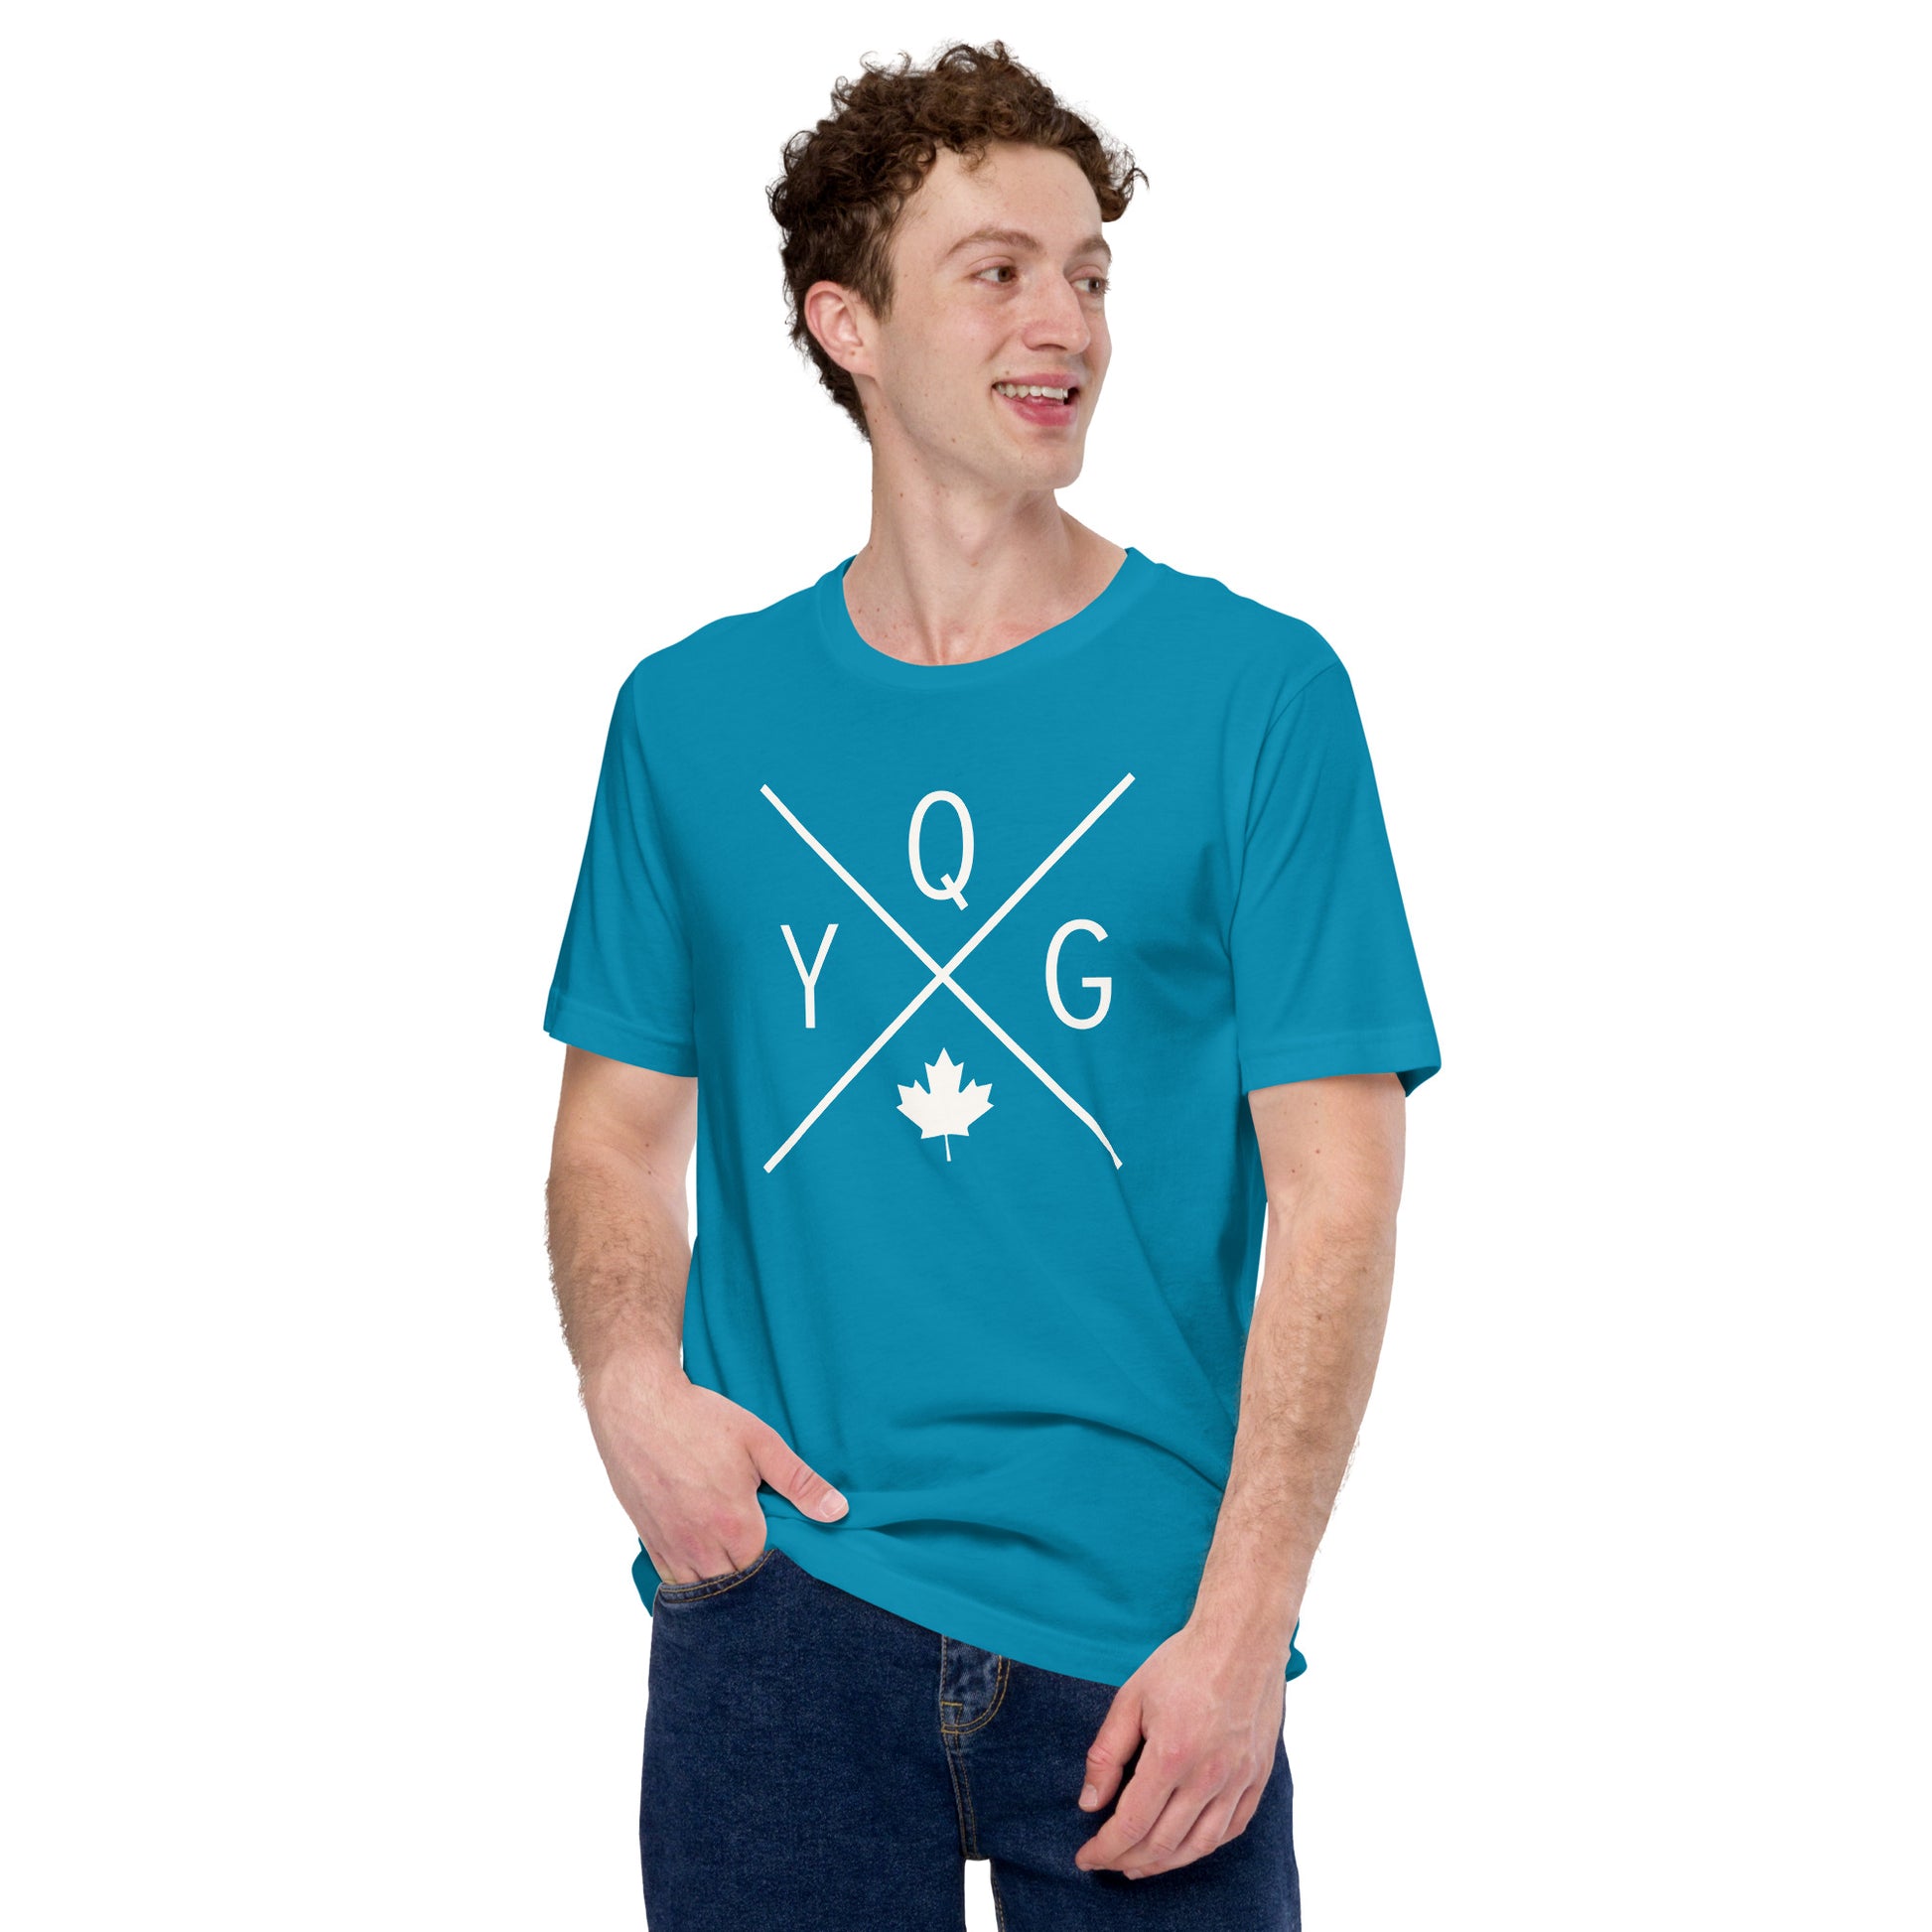 Crossed-X T-Shirt - White Graphic • YQG Windsor • YHM Designs - Image 11